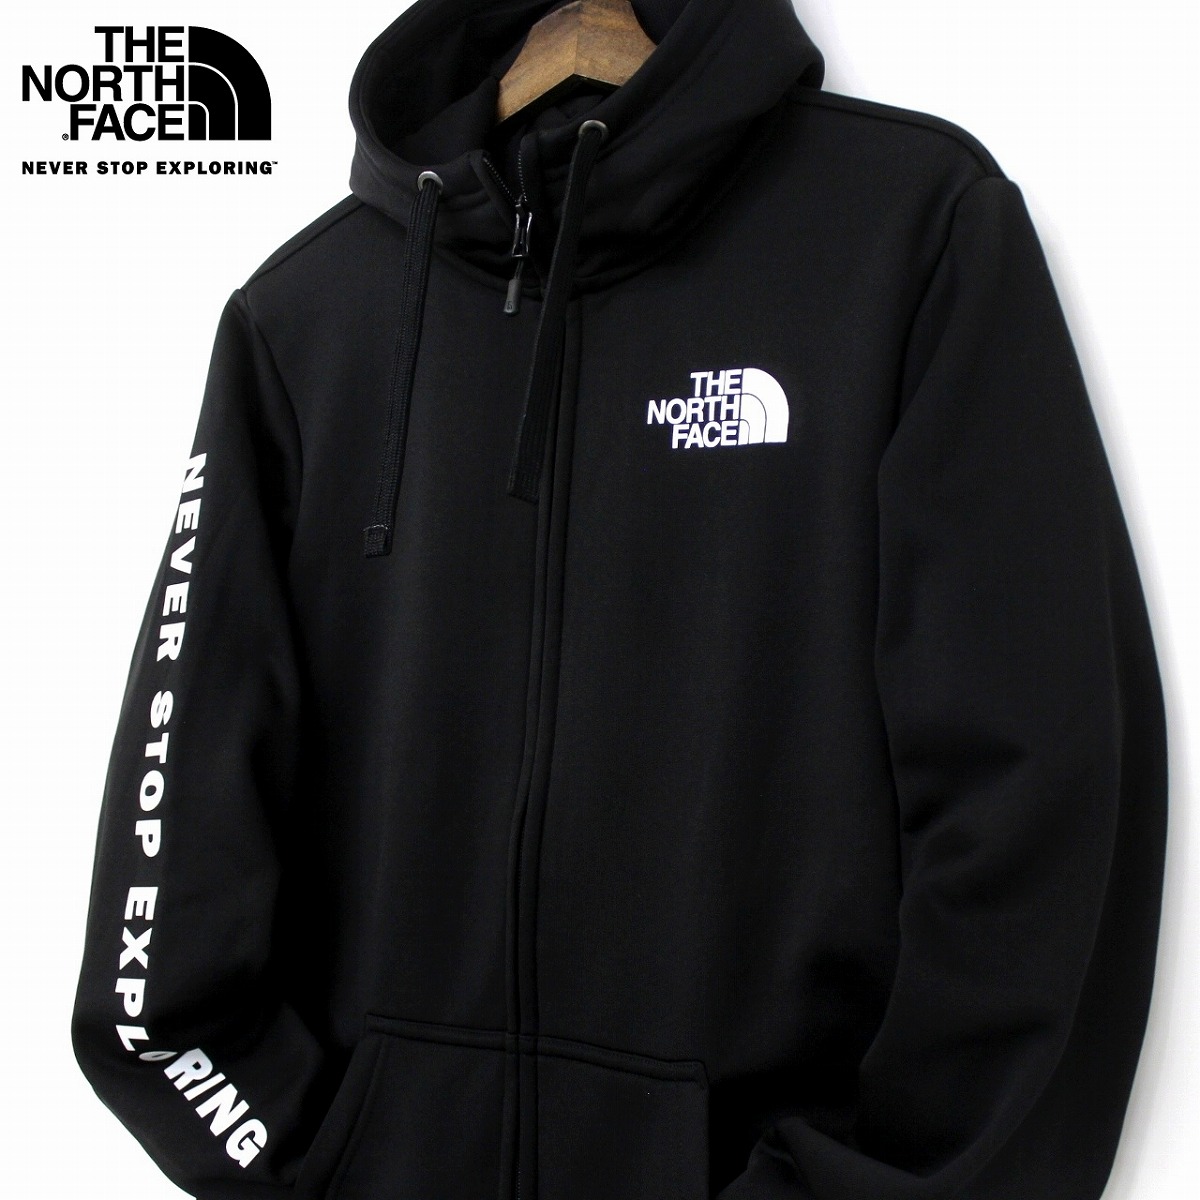 never stop exploring north face jacket